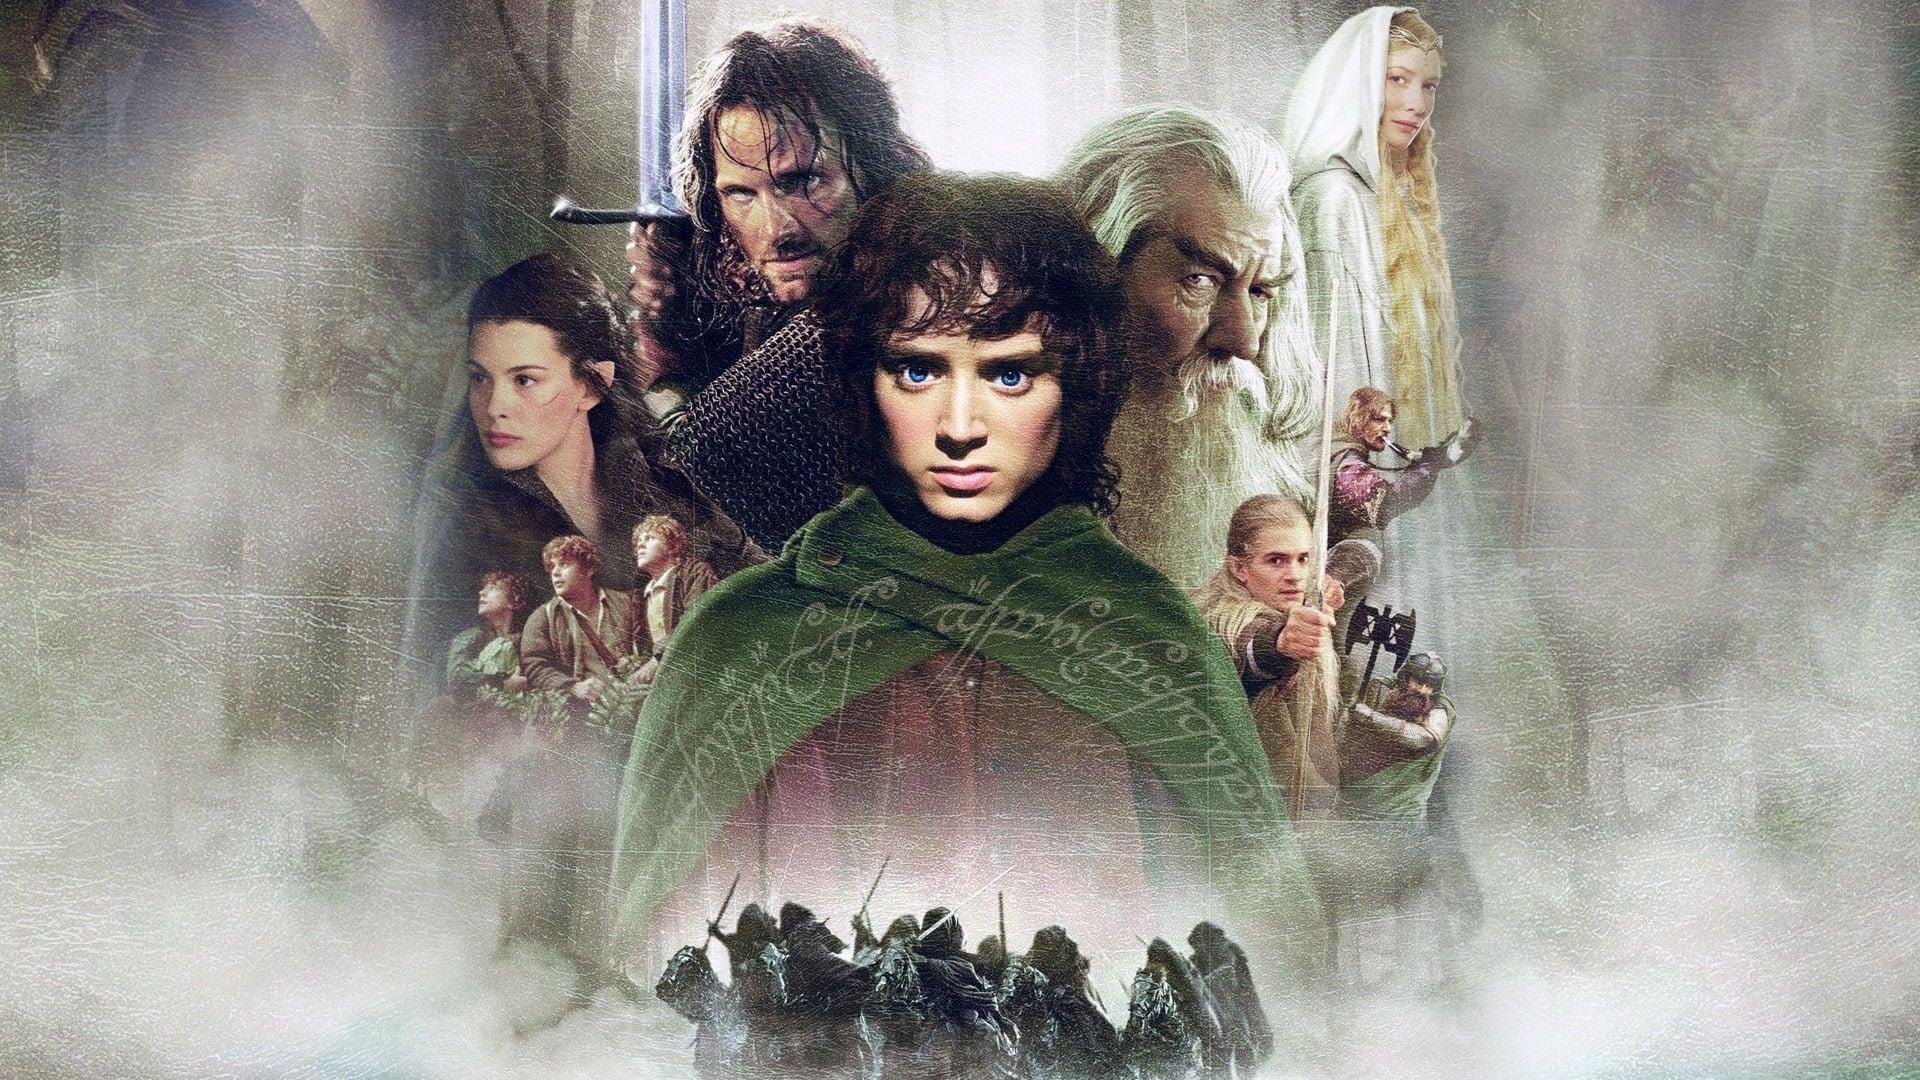 LORD OF THE RINGS: THE FELLOWSHIP OF THE RING, THE